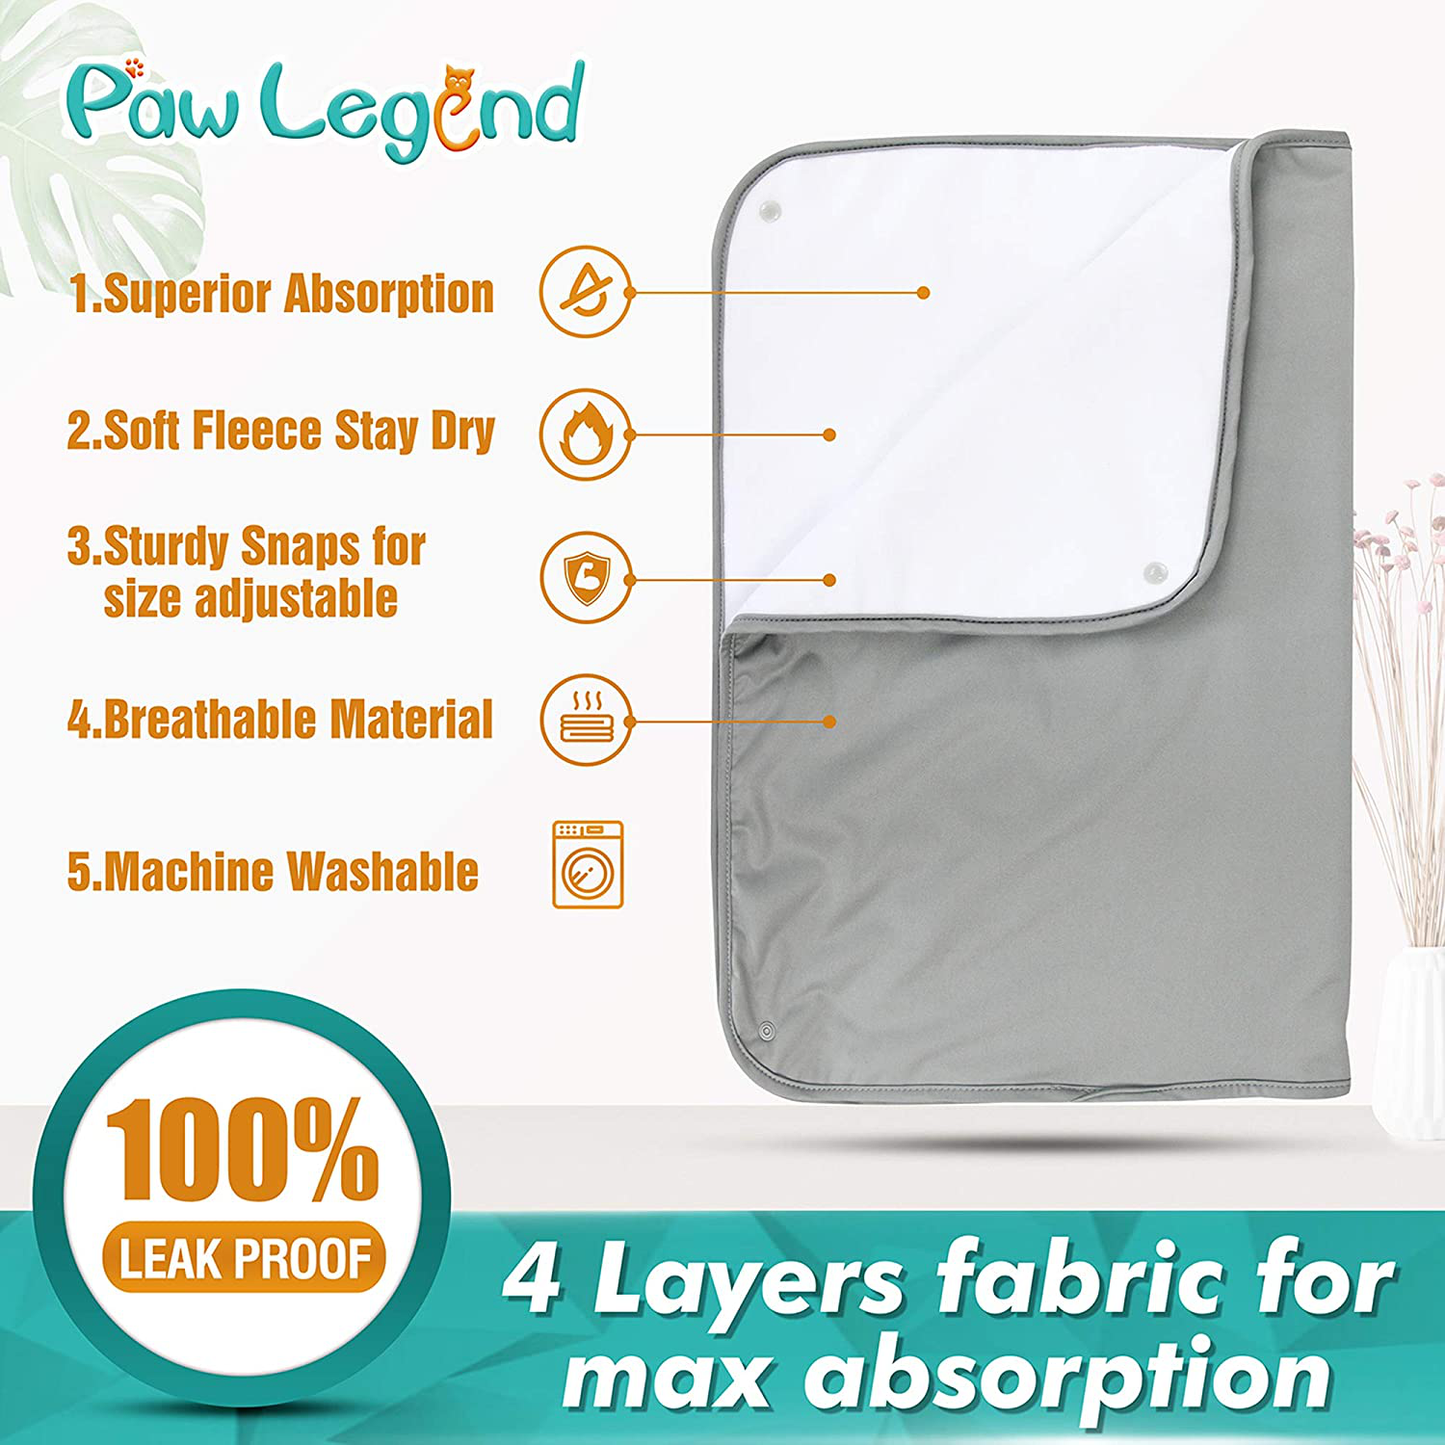 Paw Legend Washable Pee Pads for Dogs (2 Pack),Waterproof Reusable Dog Pee Pads,Washable Puppy Pads with Fast Absorbent (Grey Color)